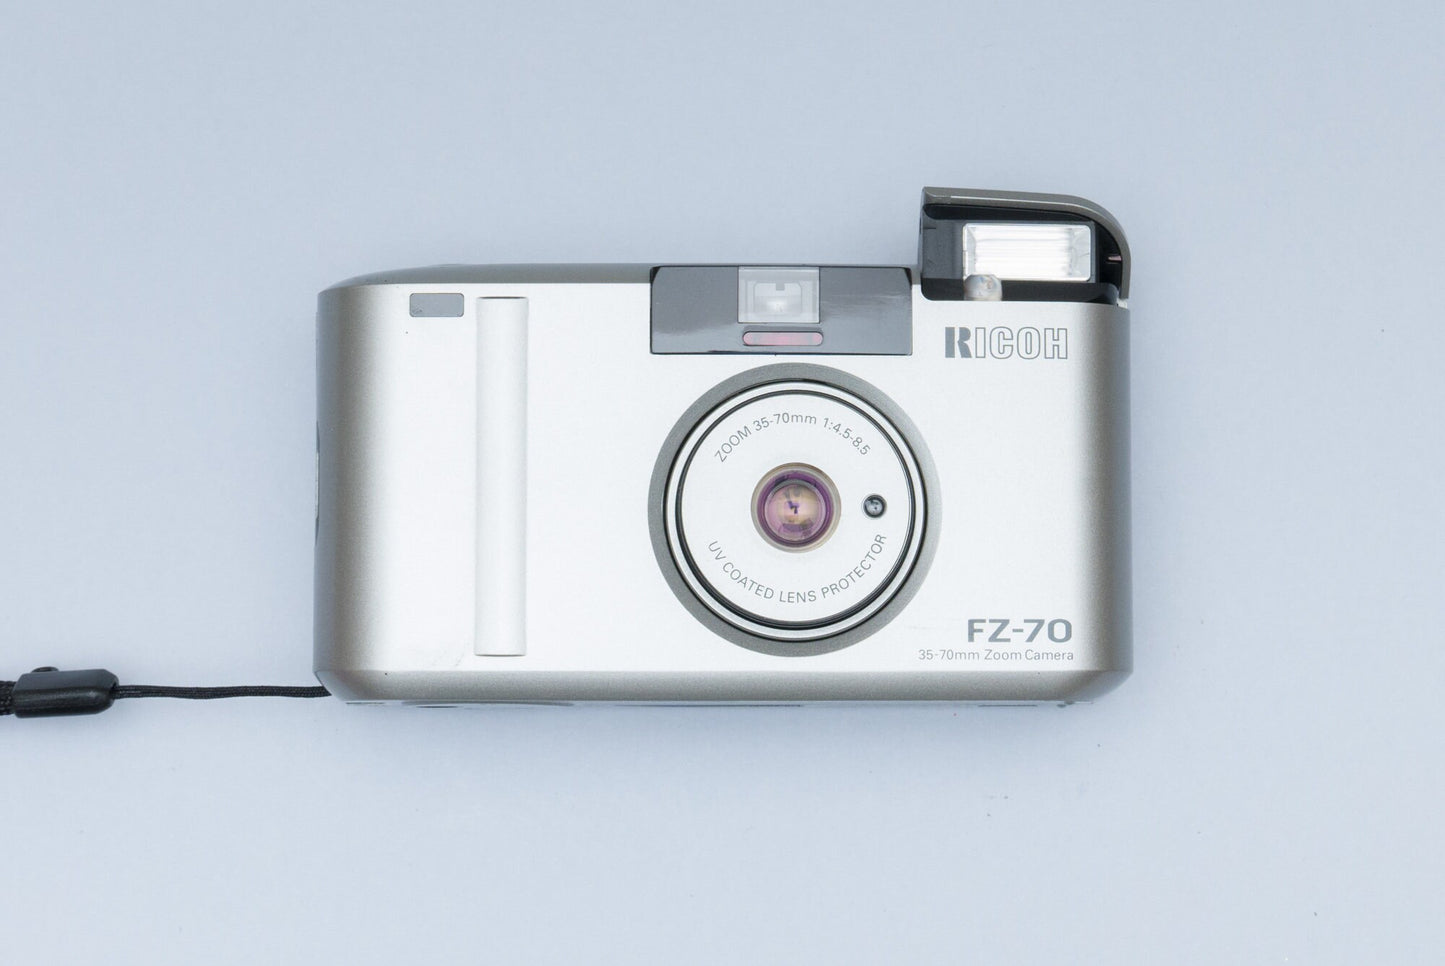 Ricoh FZ-70 Compact 35mm Point and Shoot Film Camera